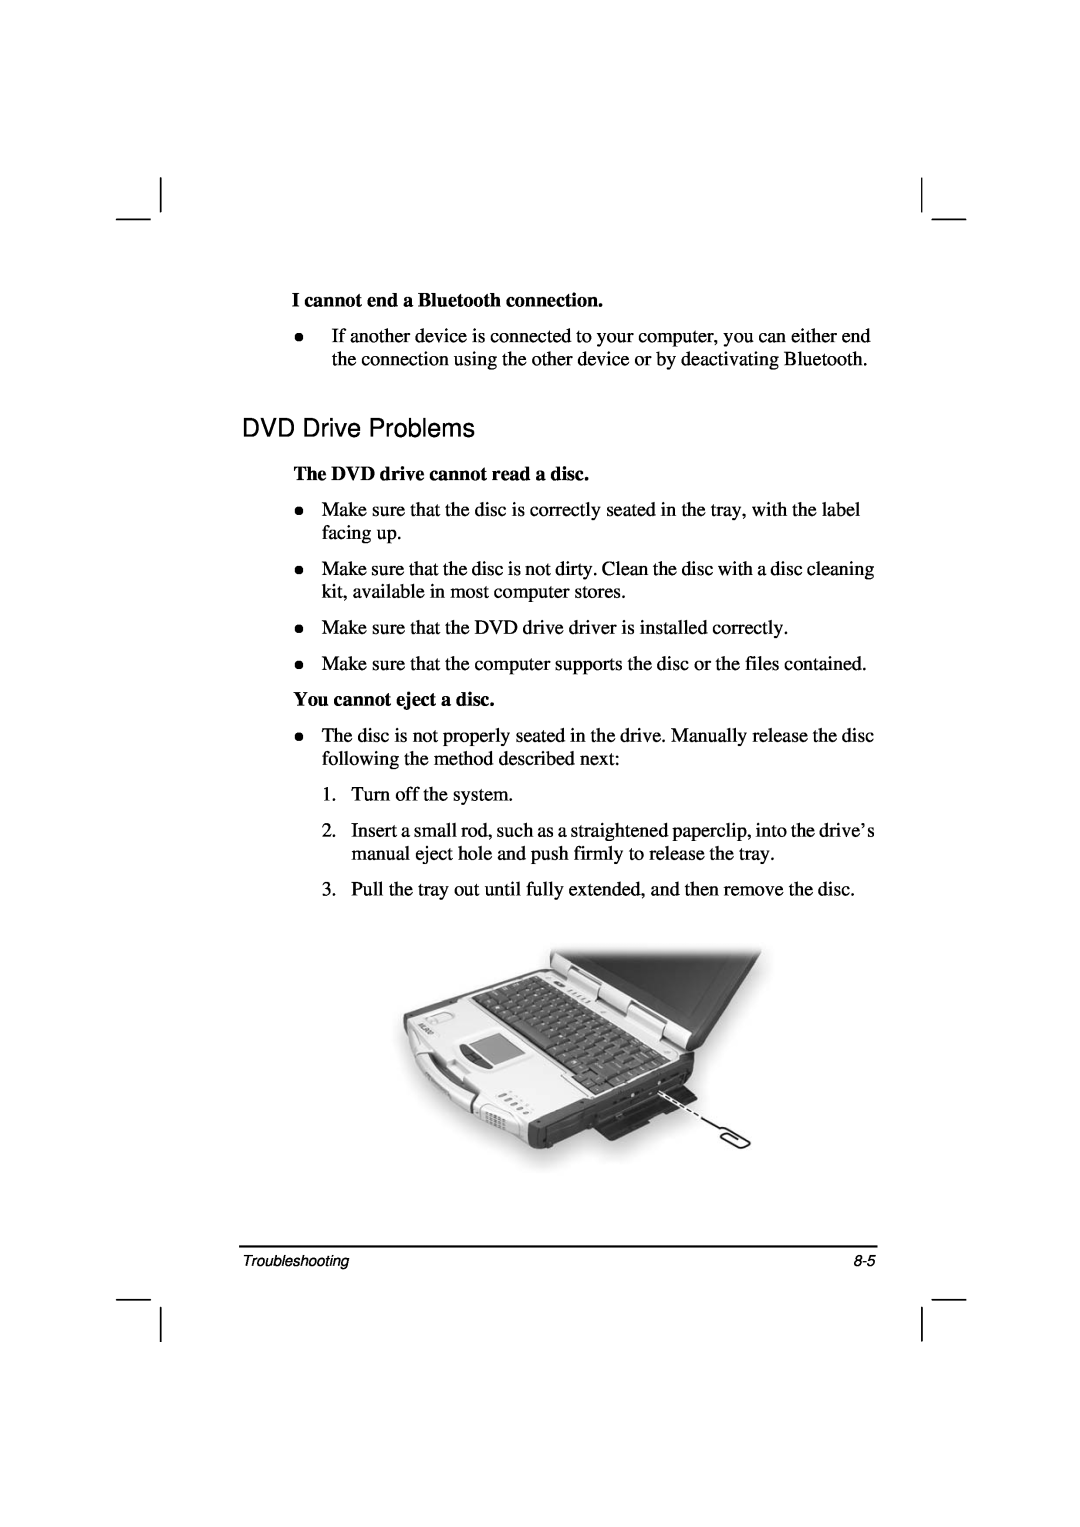 Casio HK1223 owner manual DVD Drive Problems, I cannot end a Bluetooth connection, The DVD drive cannot read a disc 